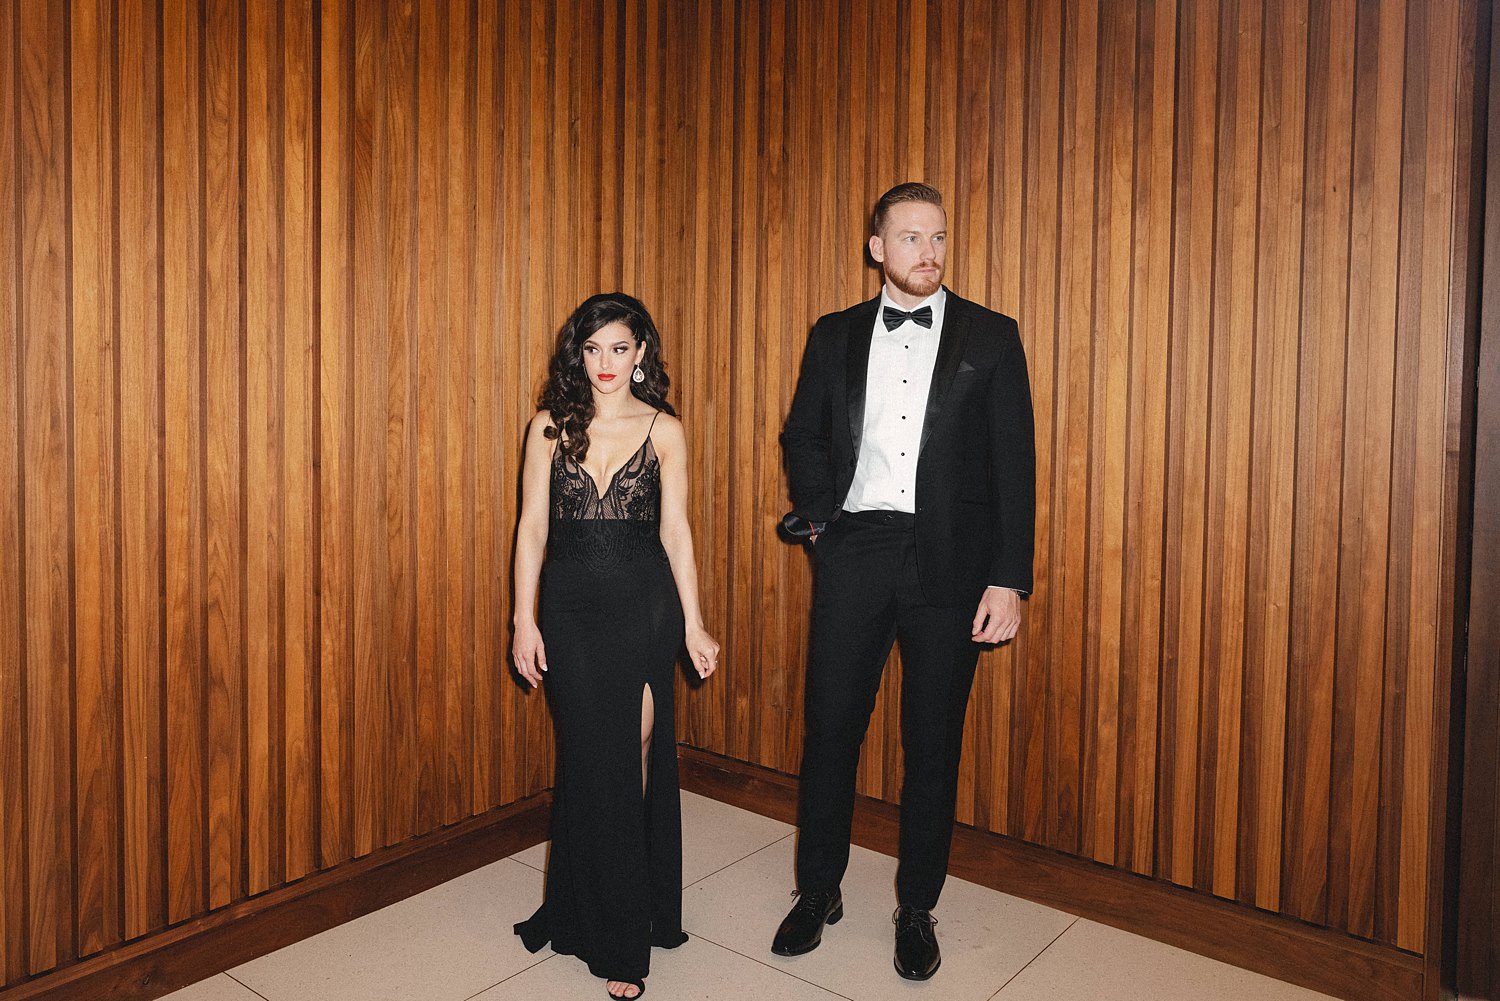 Woman in black dress and man in tuxedo with bow tie standing in front of wood paneled wall